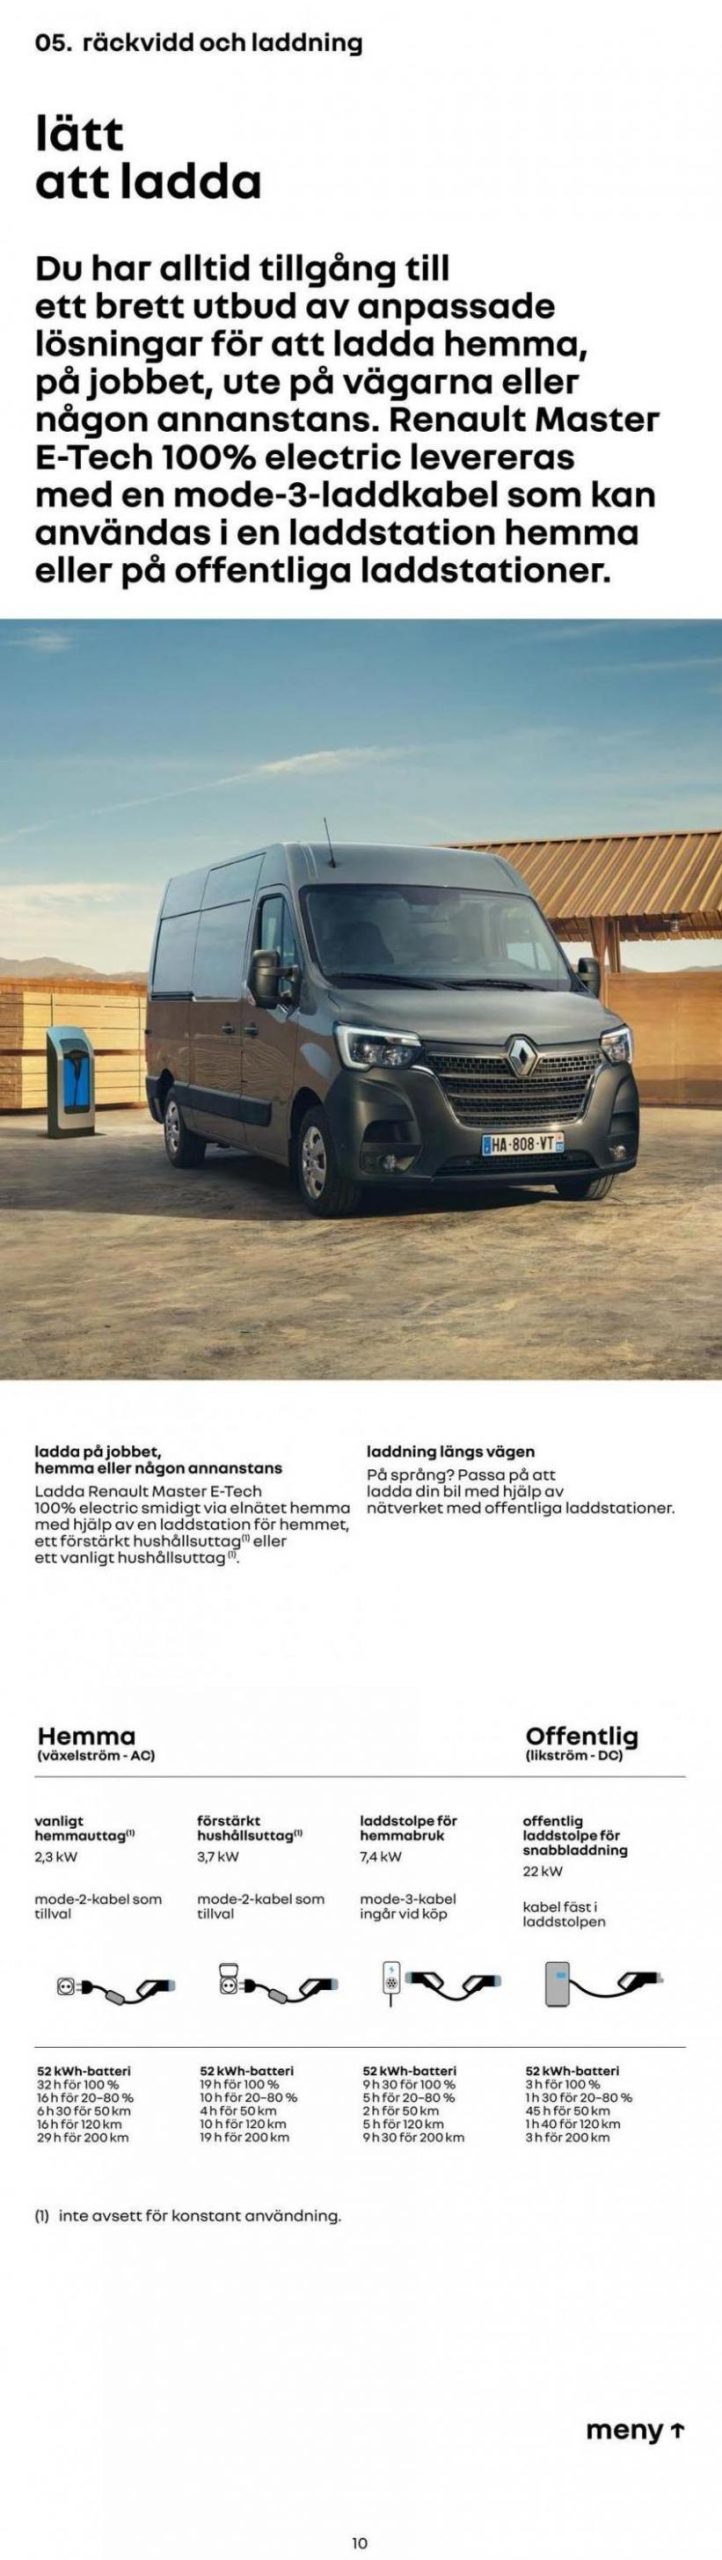 Renault Master. Page 9